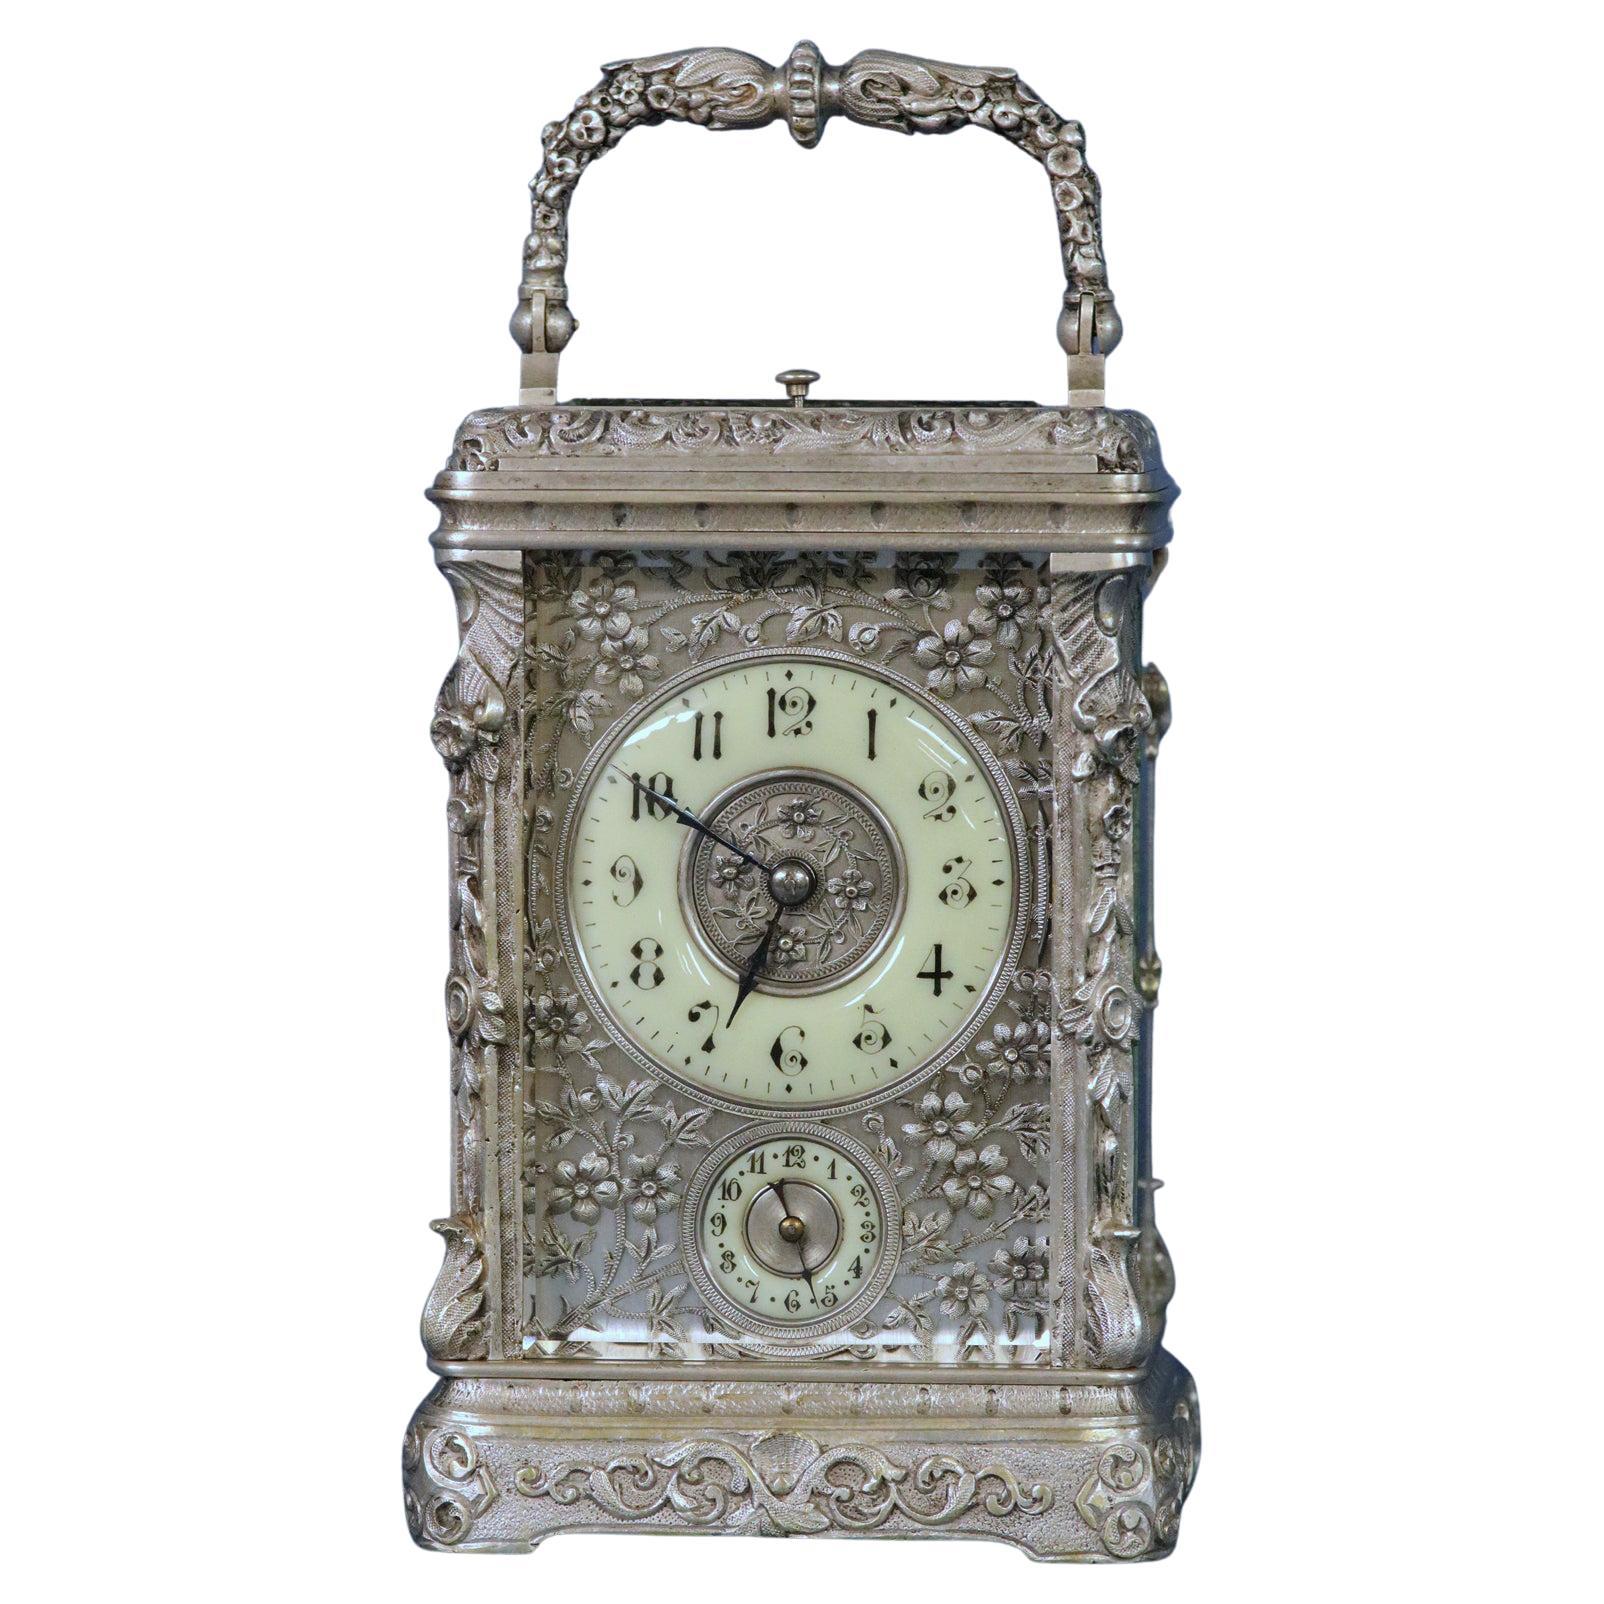 c.1895 French Cast Silvered-Bronze Carriage Clock